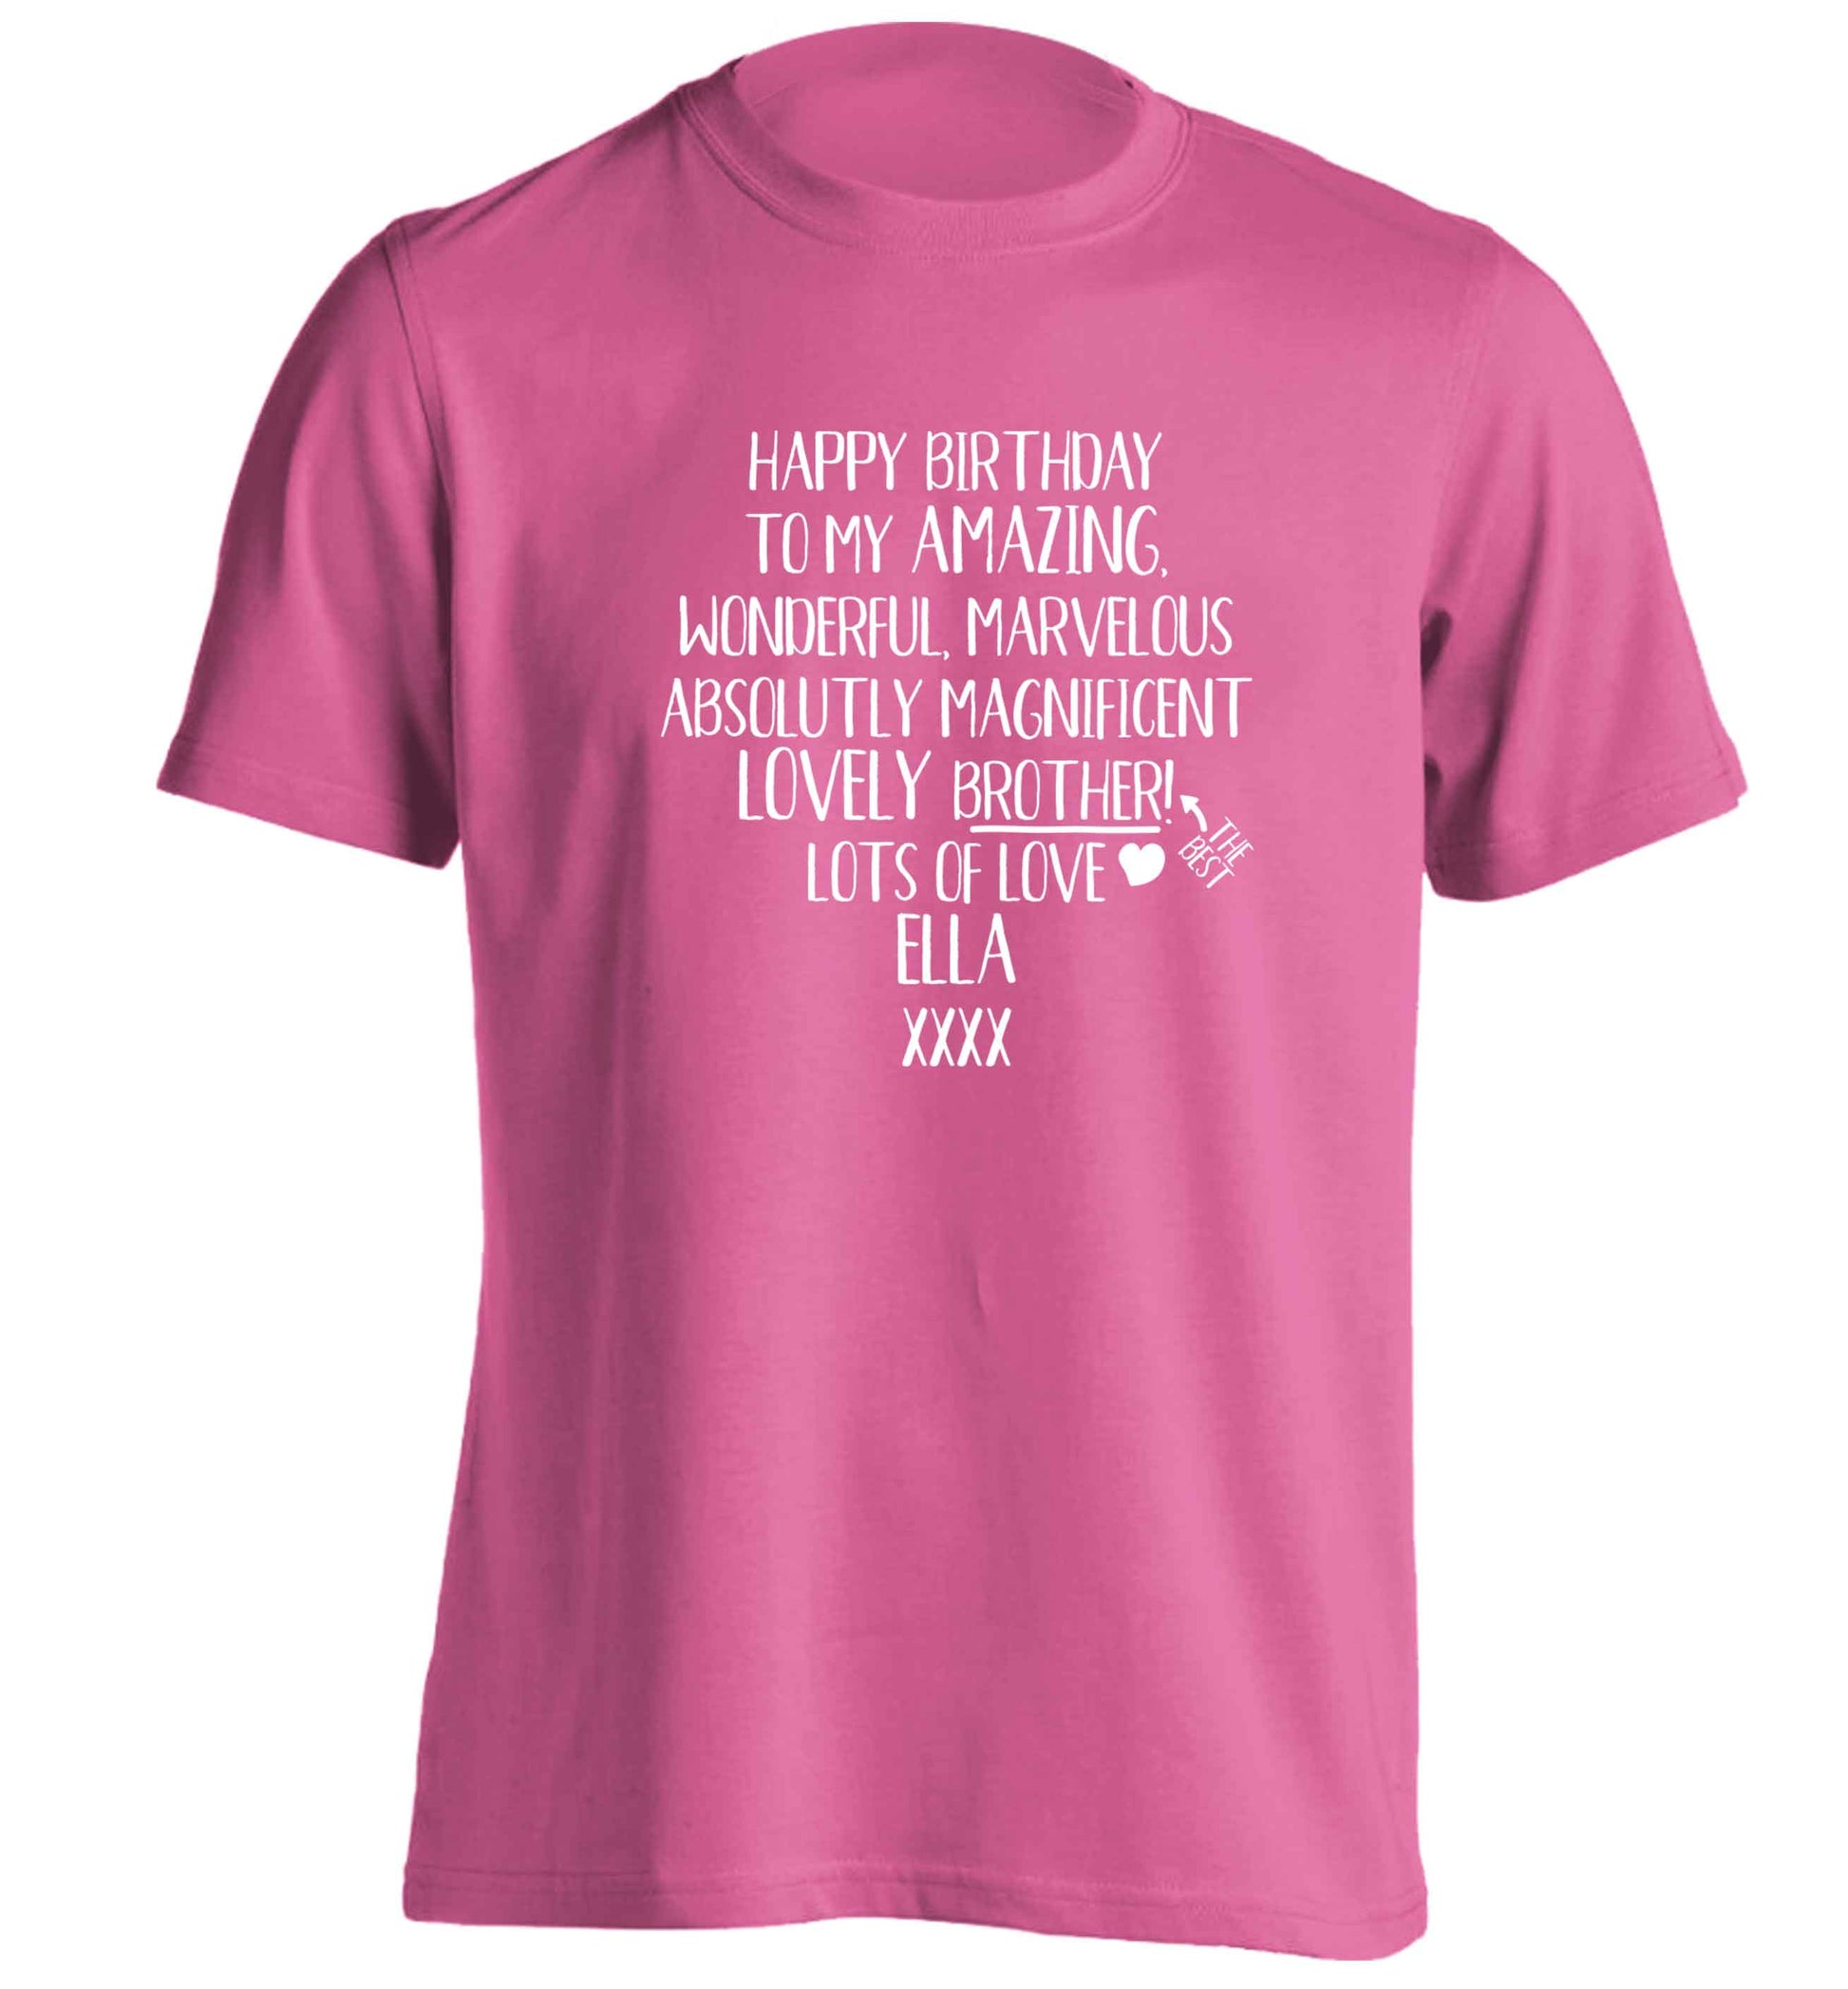 Personalised happy birthday to my amazing, wonderful, lovely brother adults unisex pink Tshirt 2XL